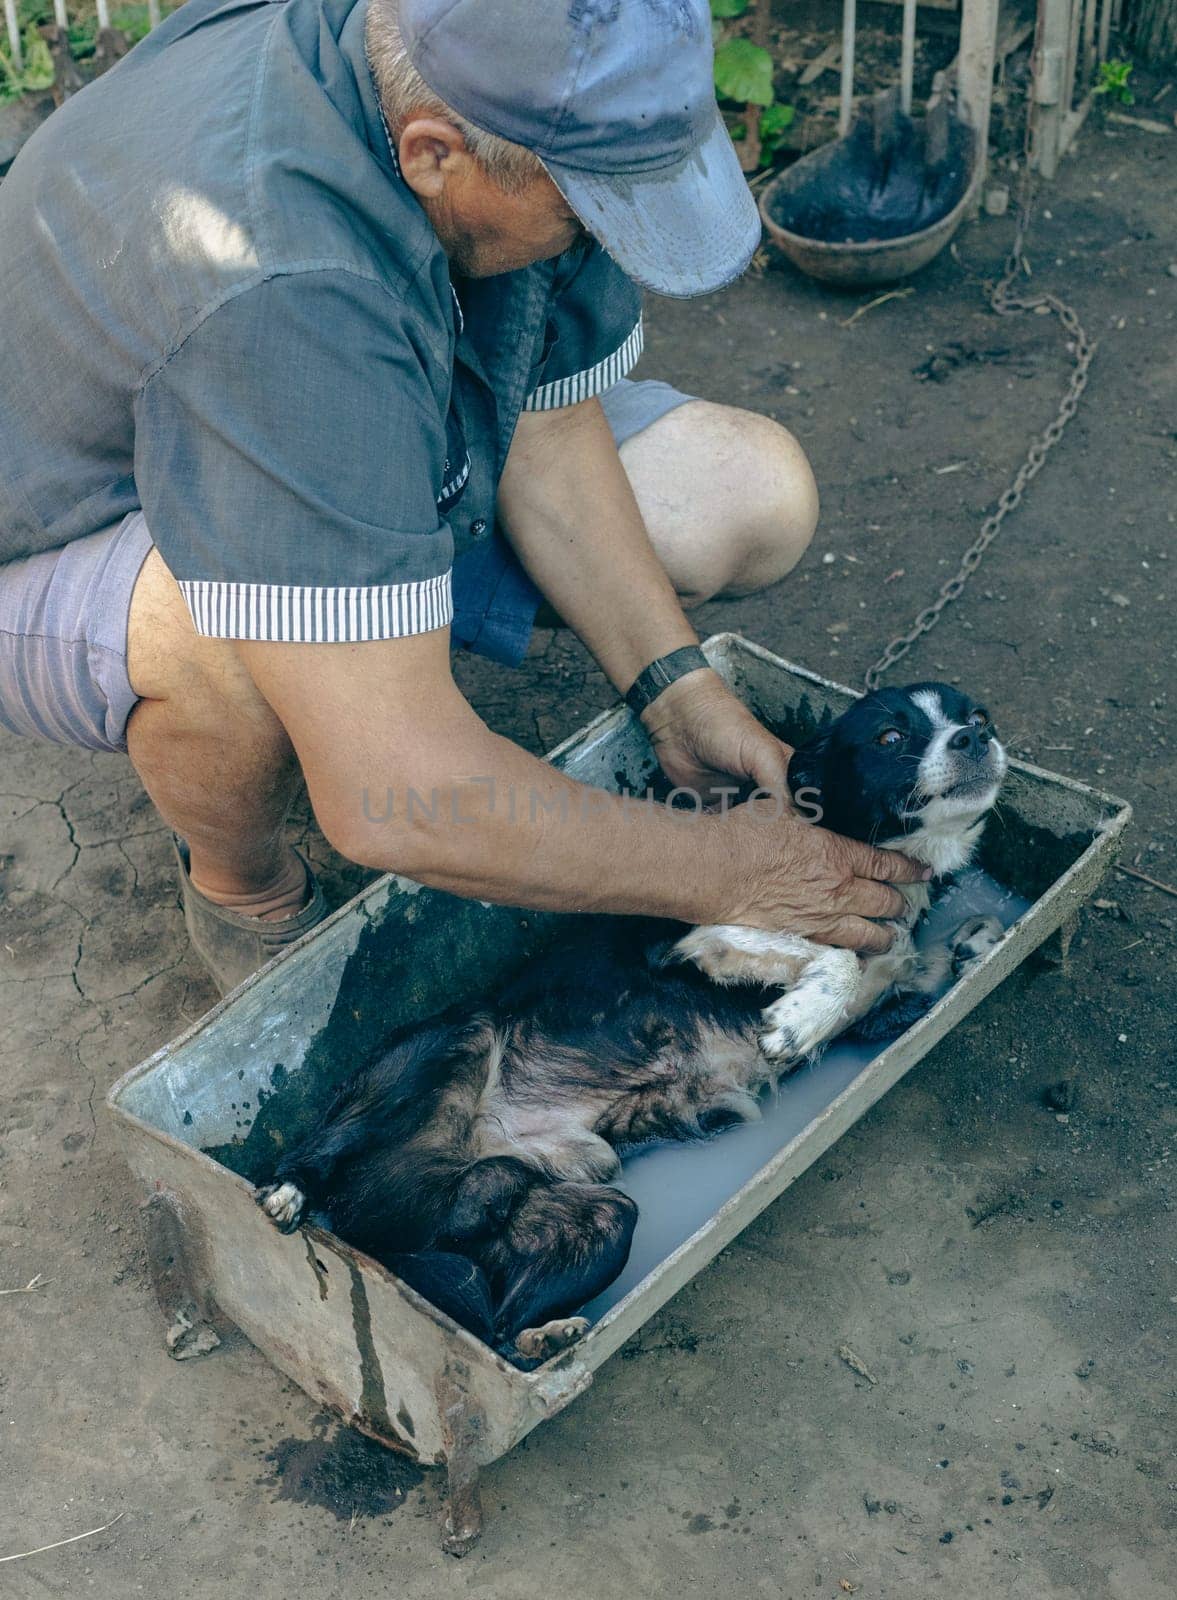 One elderly Caucasian man in old clothes and a torn cap bathes his dog for fleas in an iron trough with medicinal water, close-up view from above.